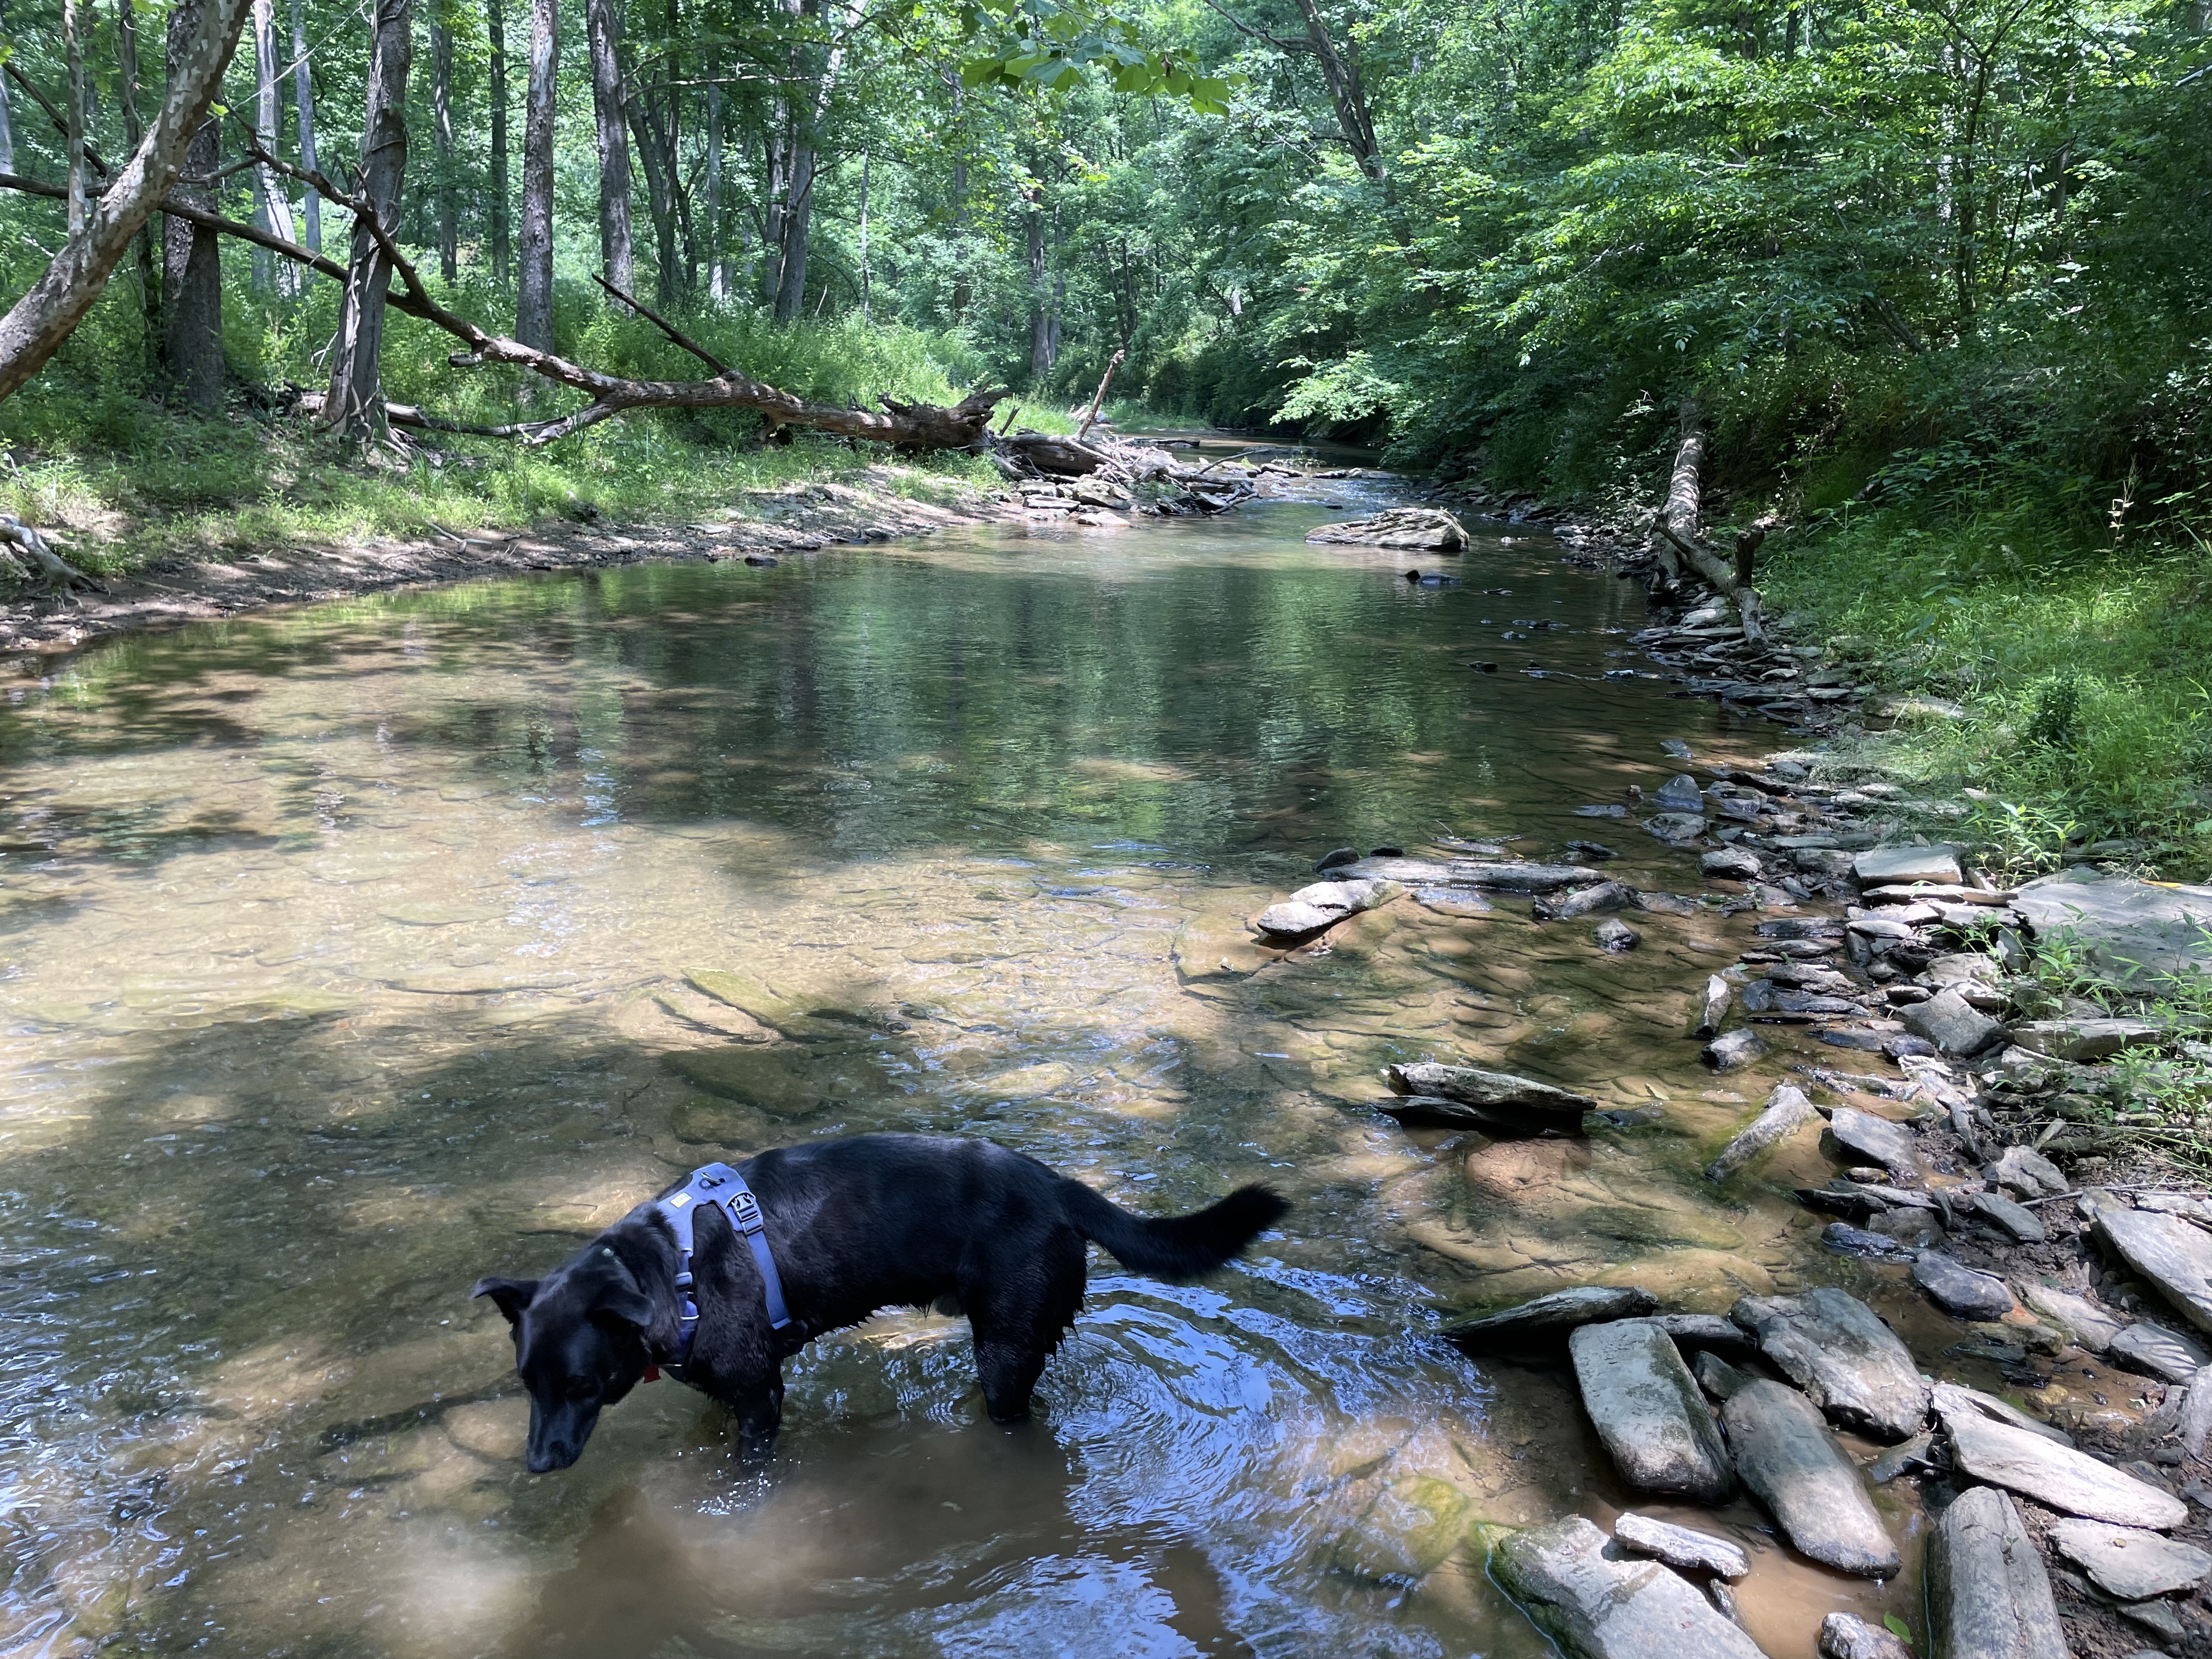 Black dog in the middle of a stream